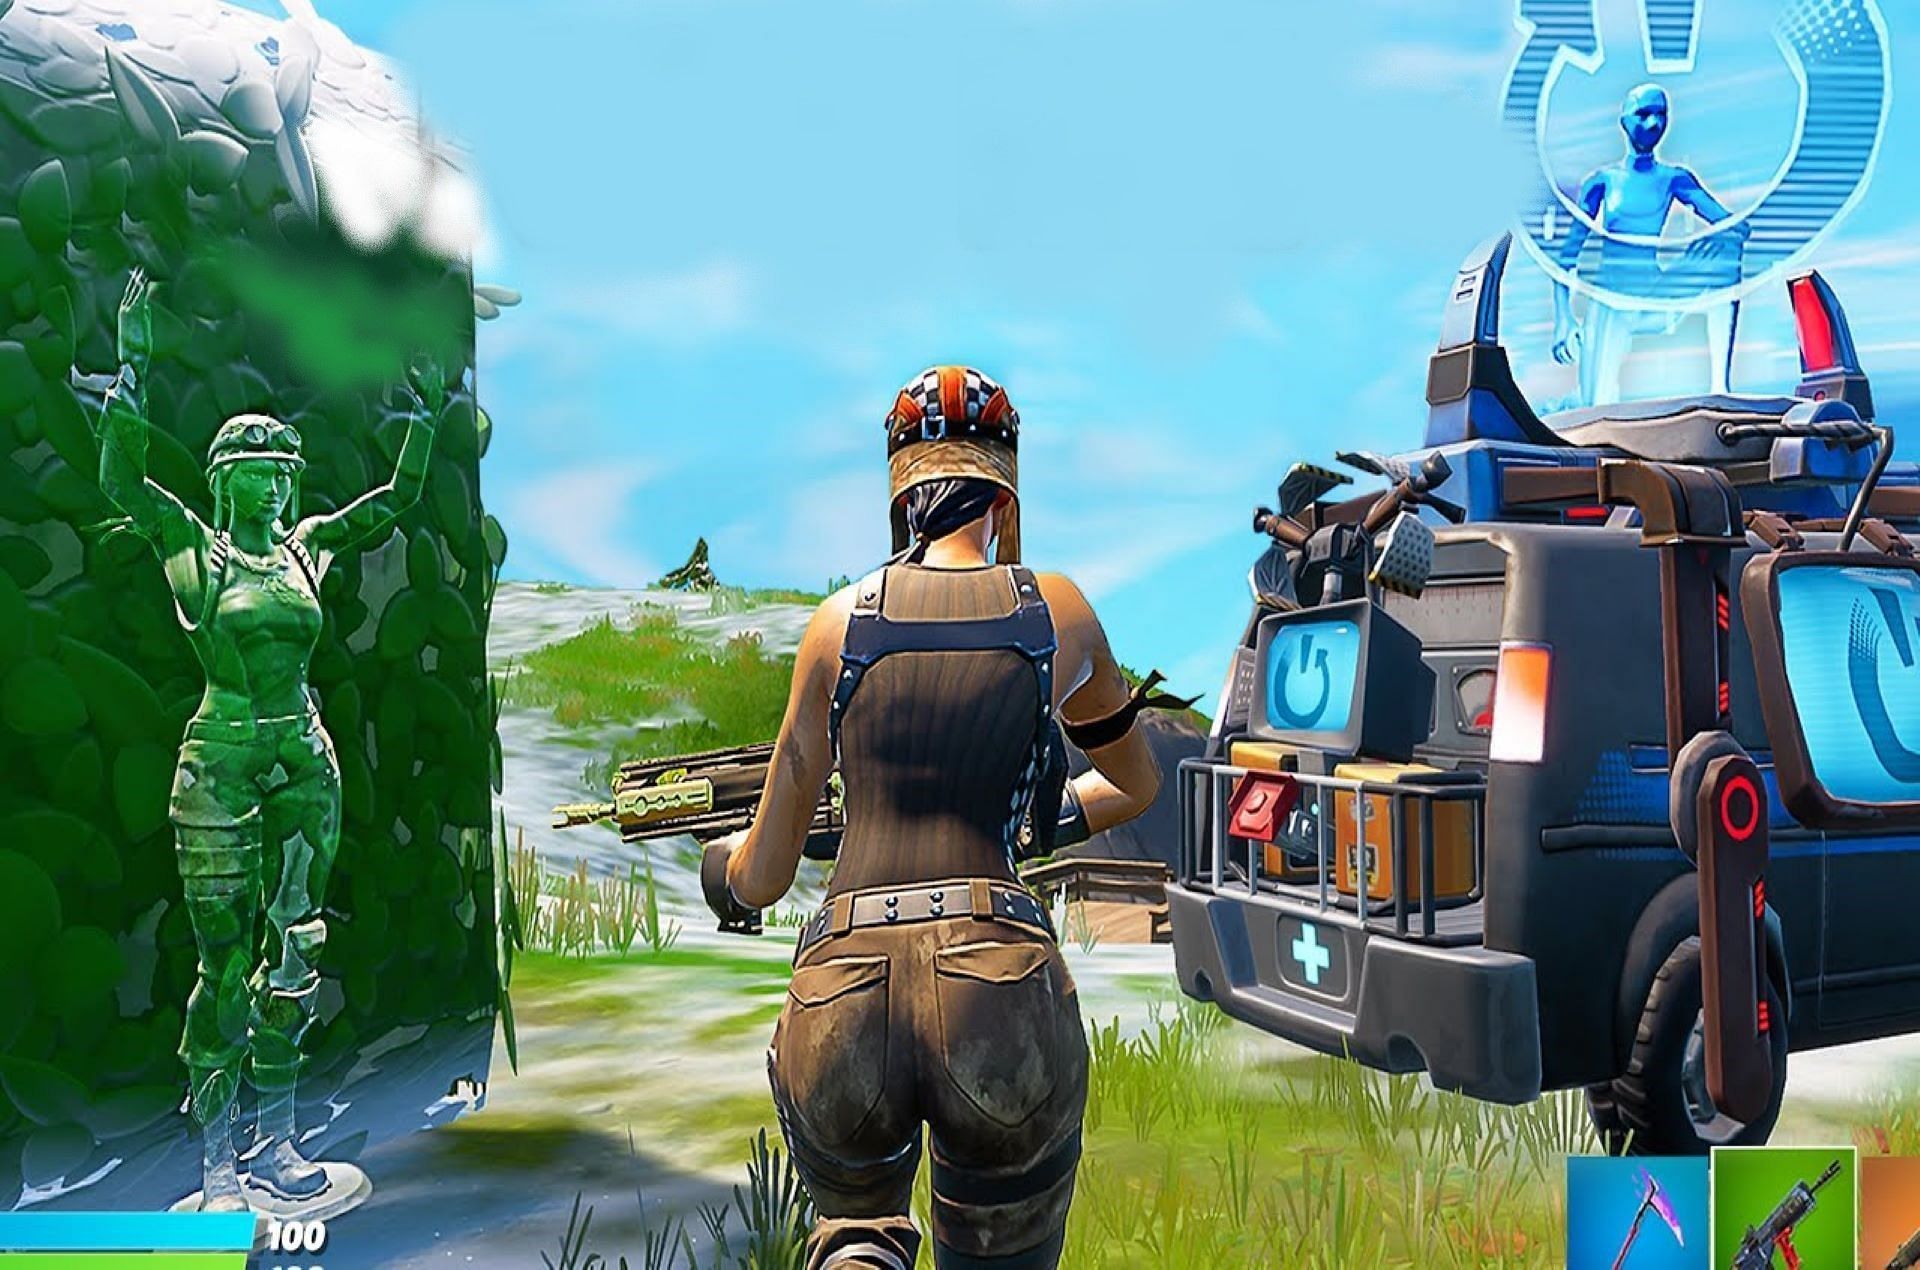 Skins that camouflages with the surroundings (Image via SoaRMilo/YouTube)